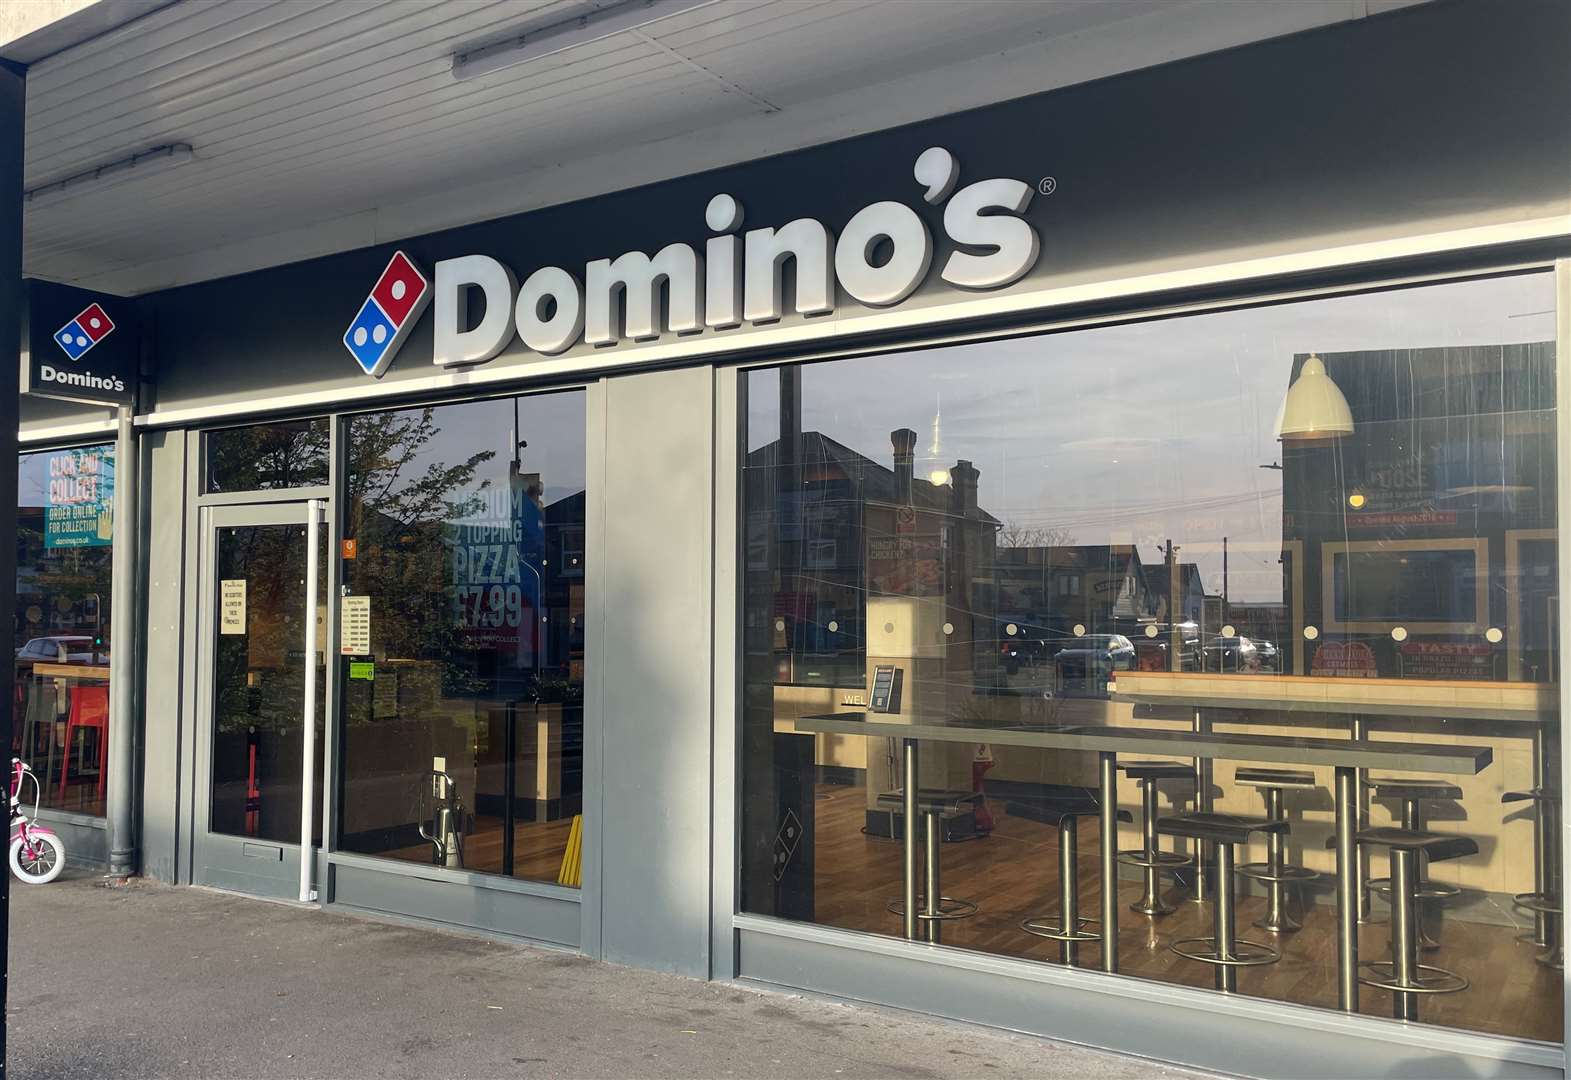 Domino's opened its largest UK dine-in restaurant back in 2016